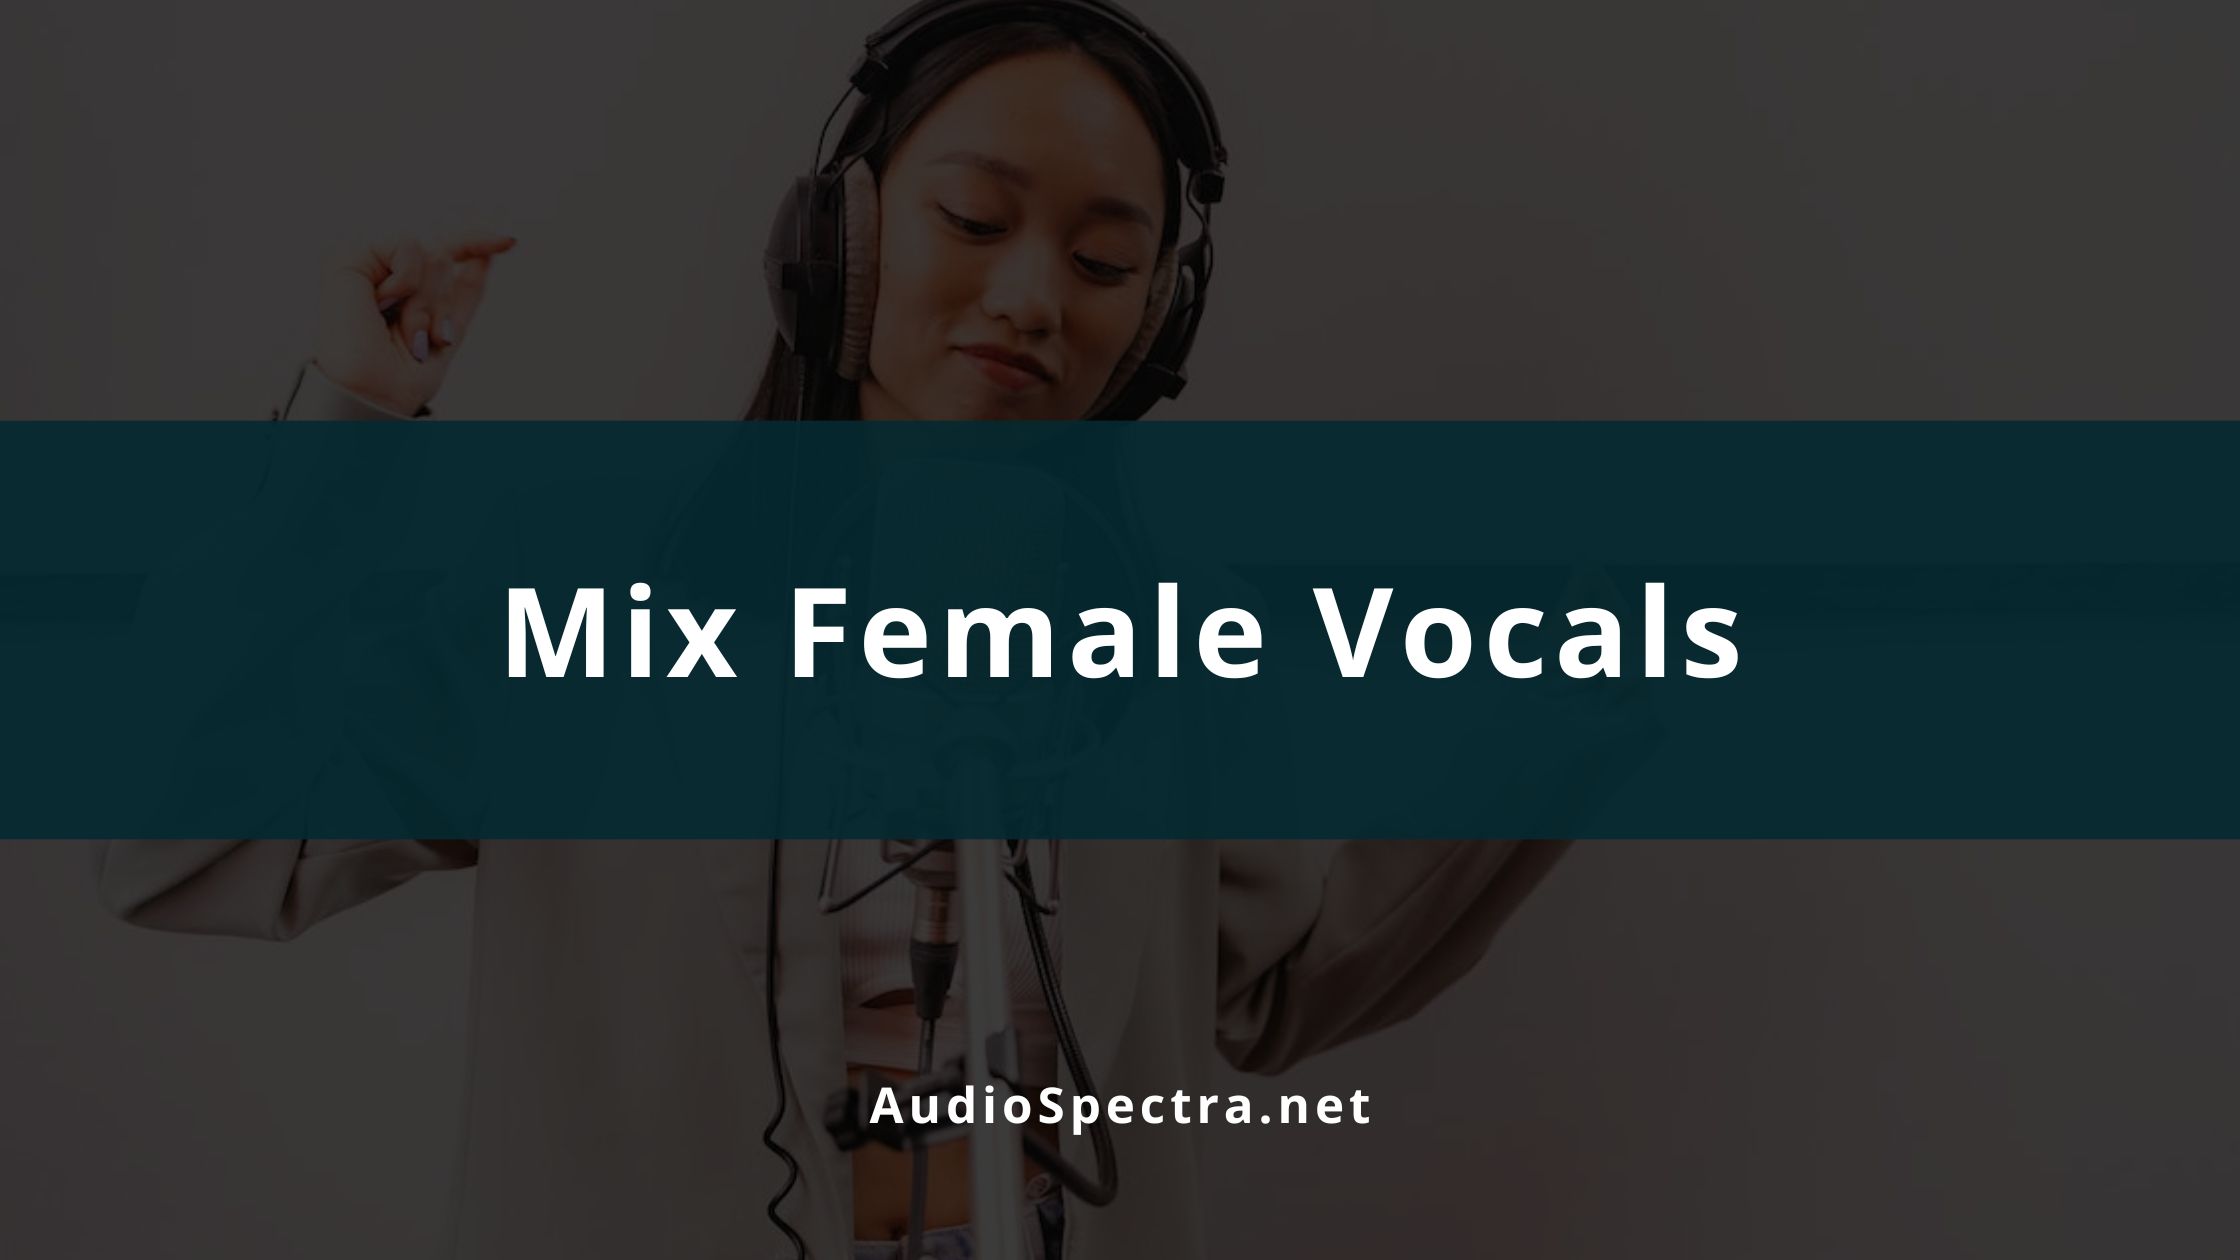 How To Mix Female Vocals